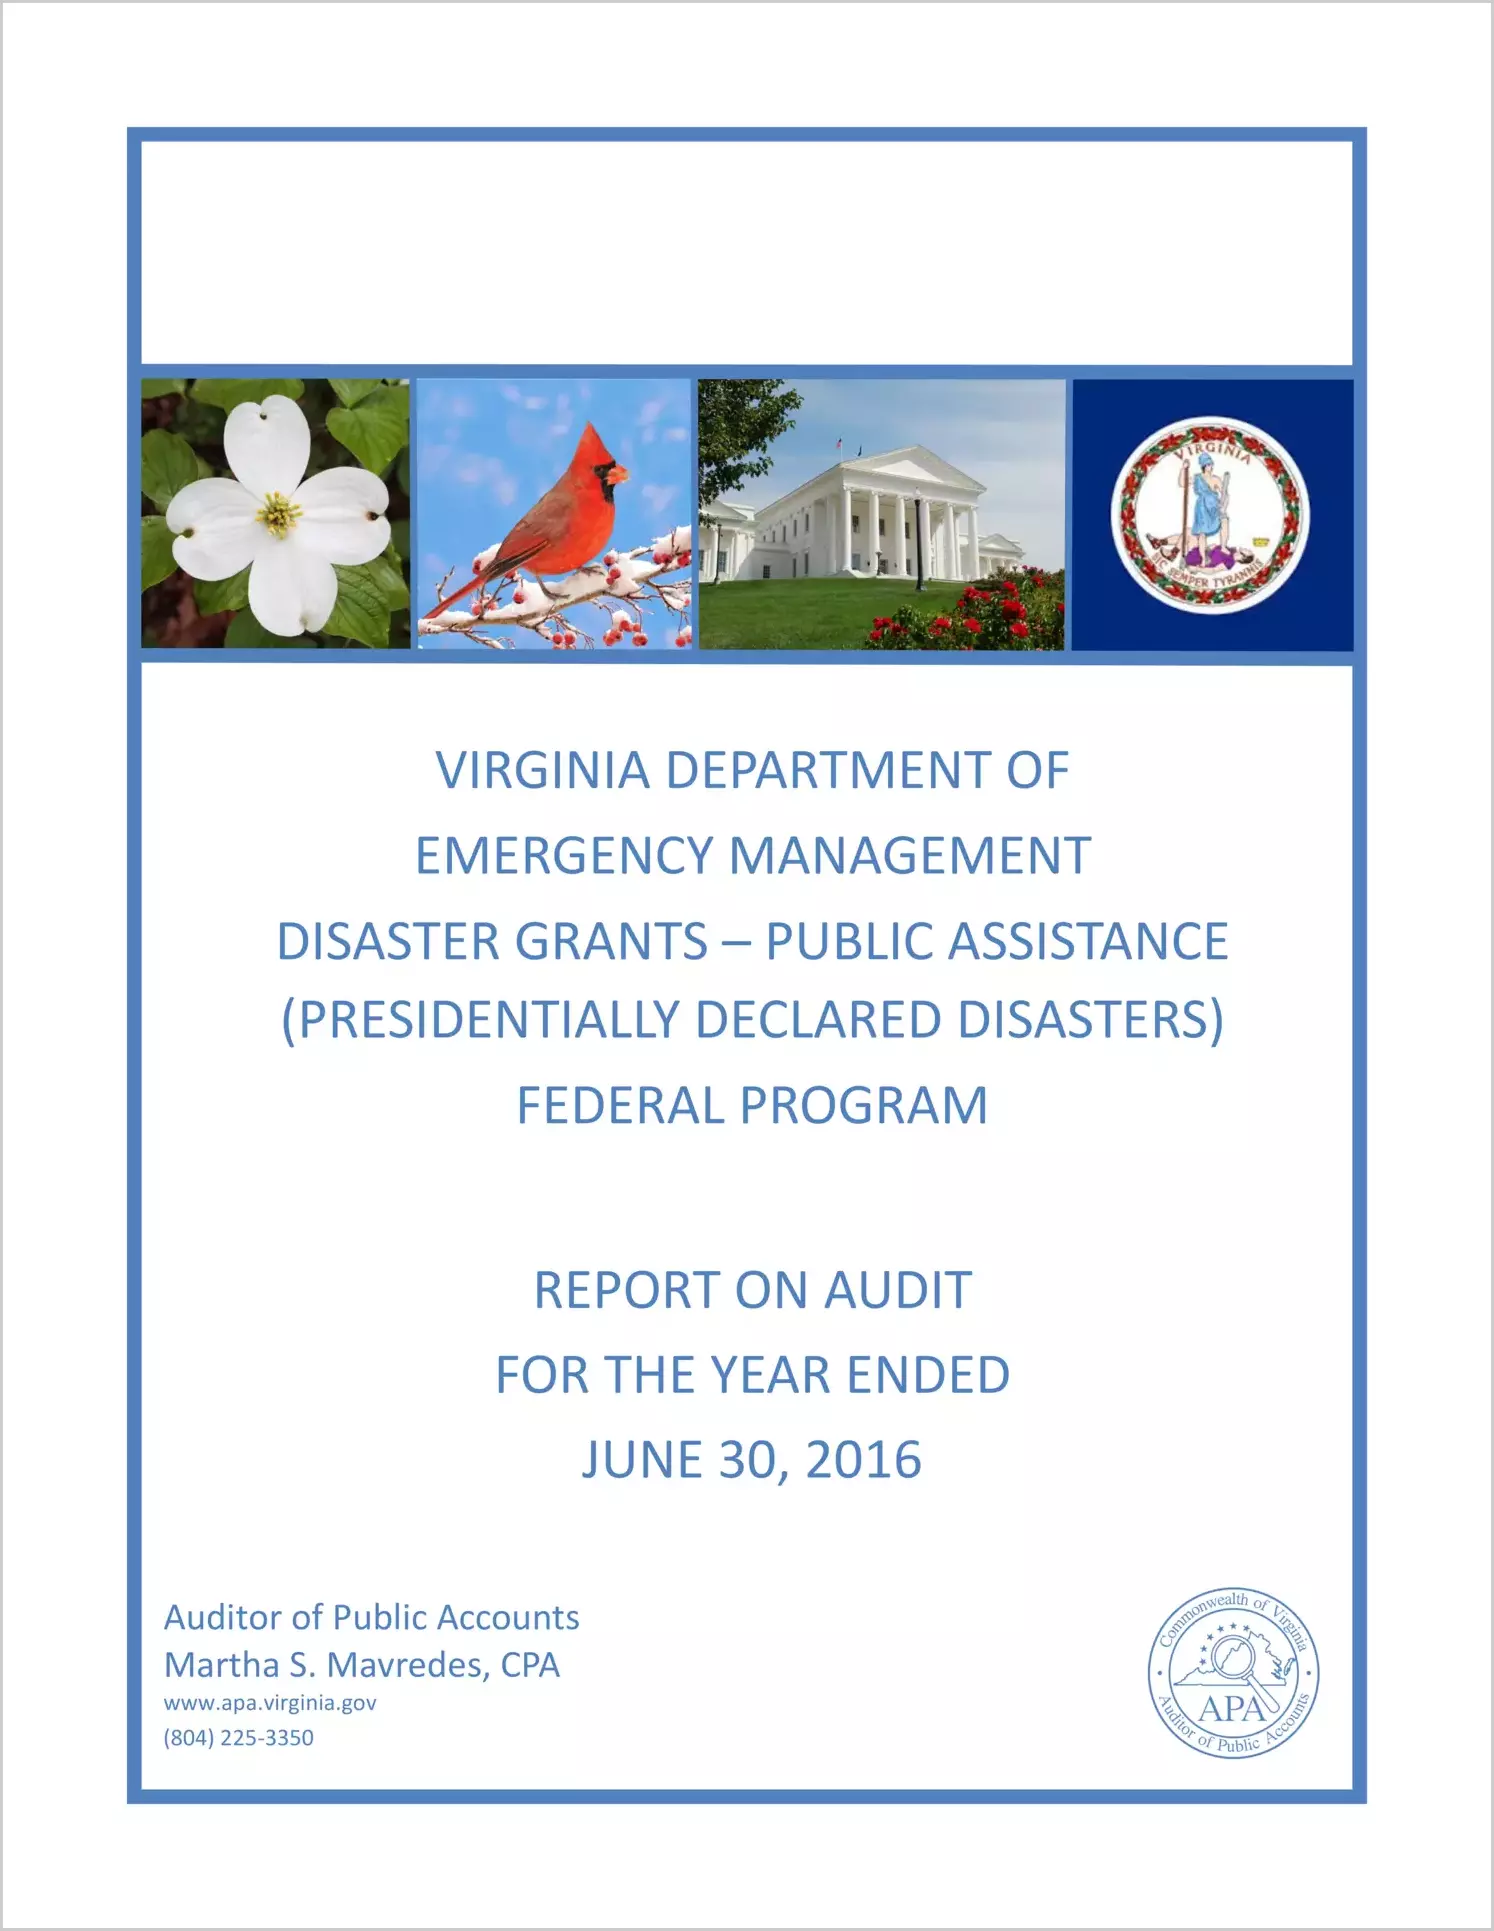 Virginia Department of Emergency Management - Disaster Grants - Public Assistance (Presidentially Declared Disasters) Federal Program - for the year ended June 30, 2016